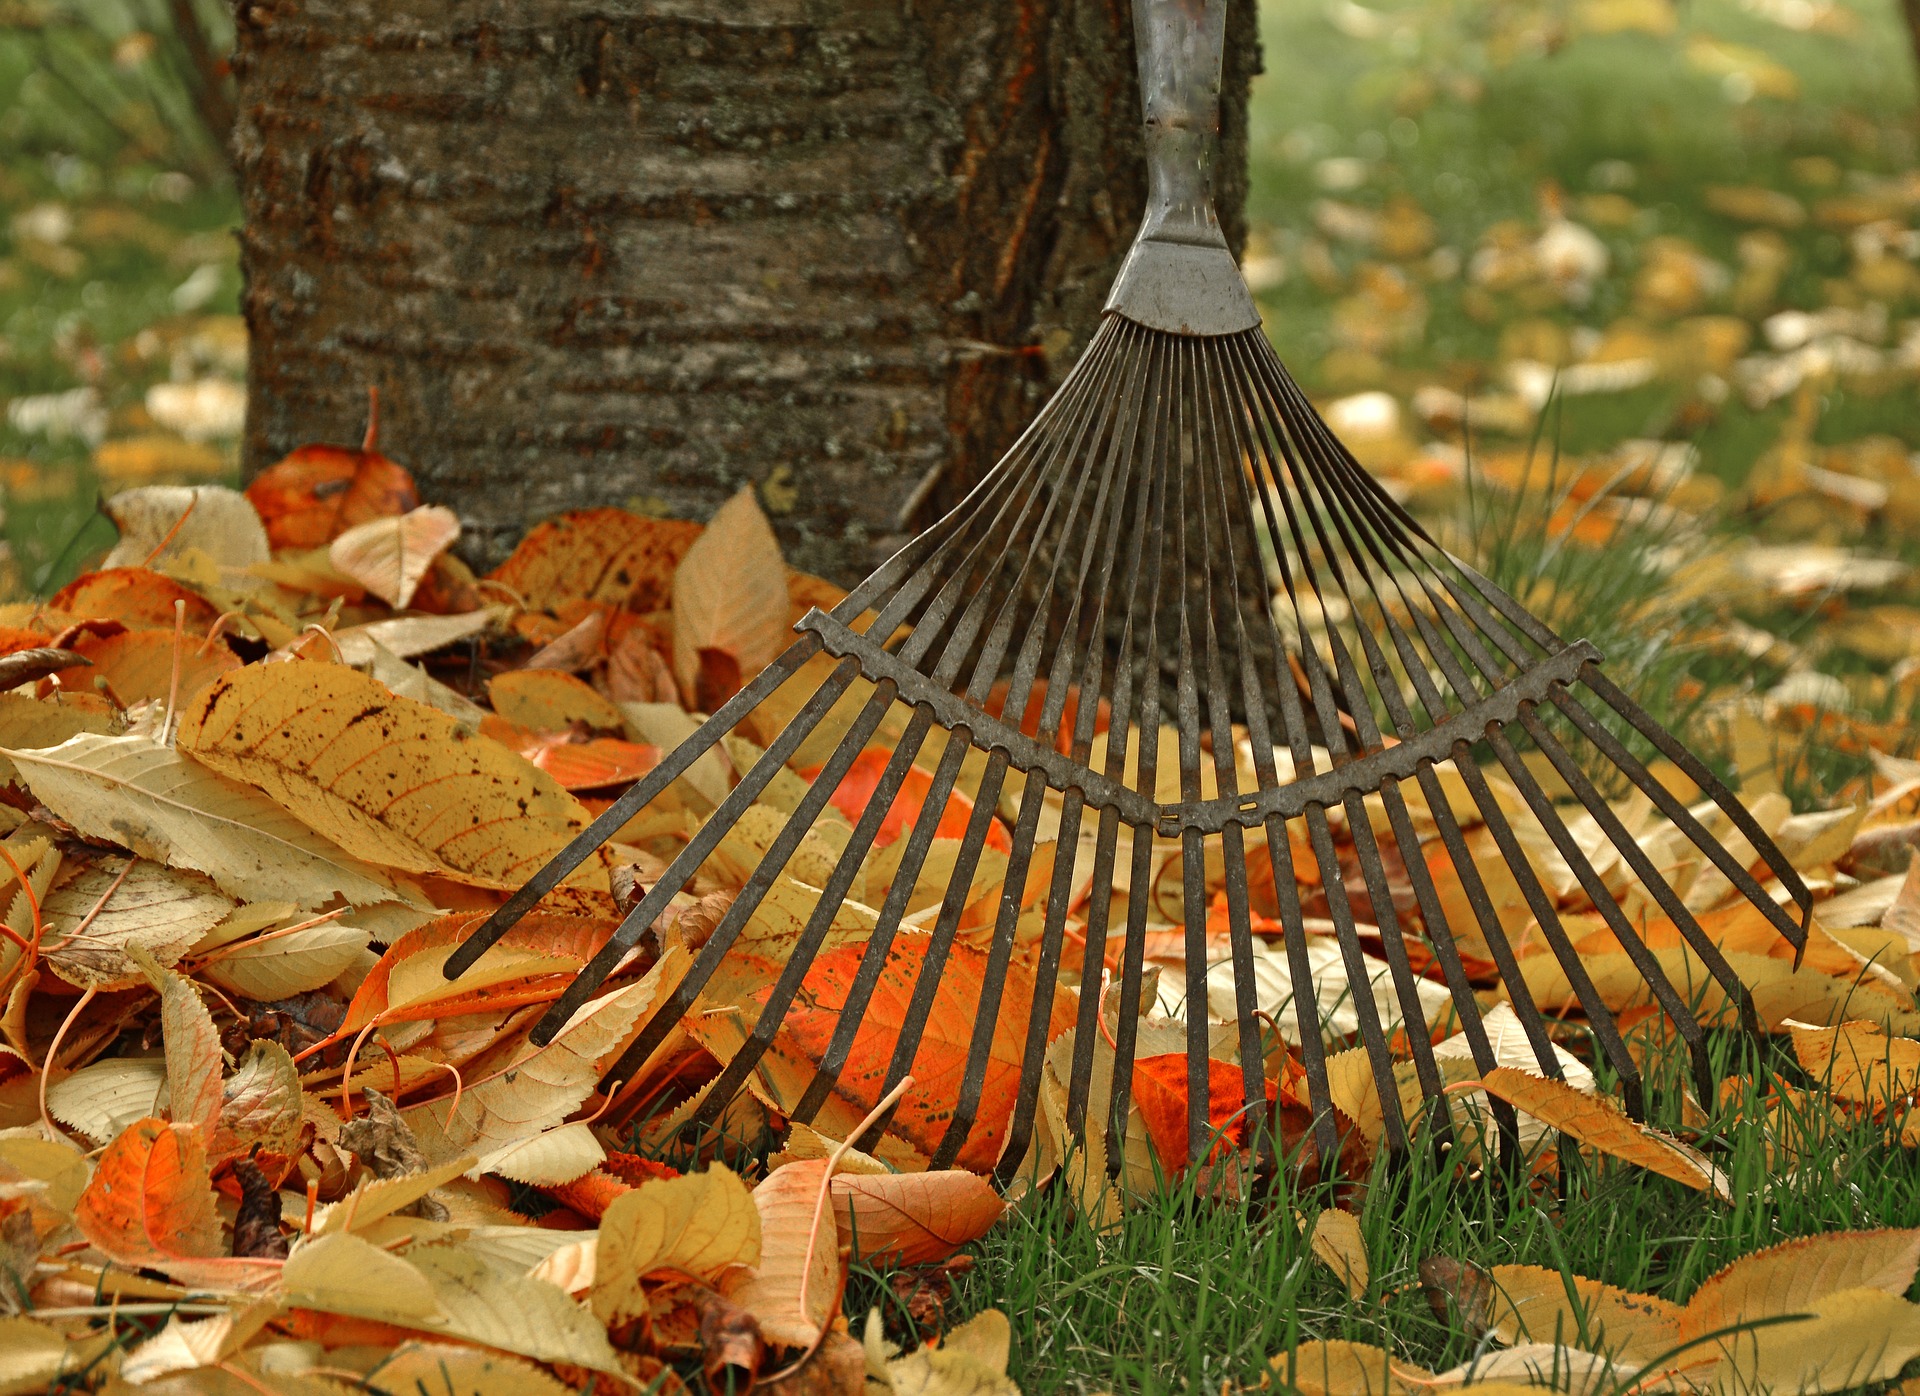 Autumn Leaves: The Four Best Ways To Use Fallen or Dead Leaves In Your Garden This Autumn